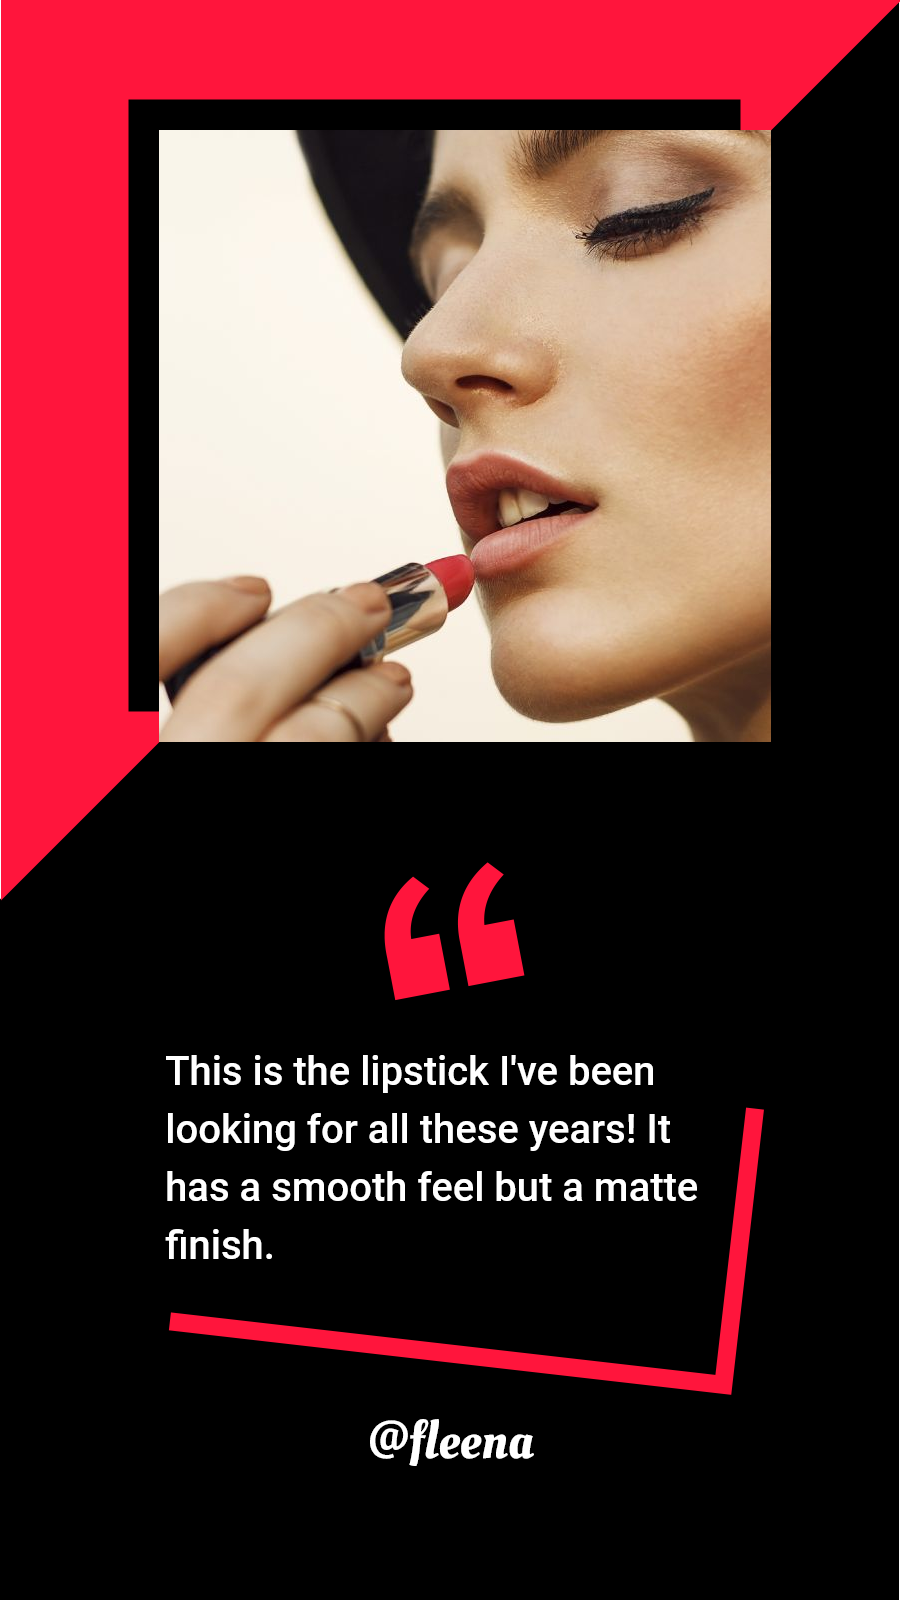 Lipstick Beauty Product Customer Feedback Review Ecommerce Story